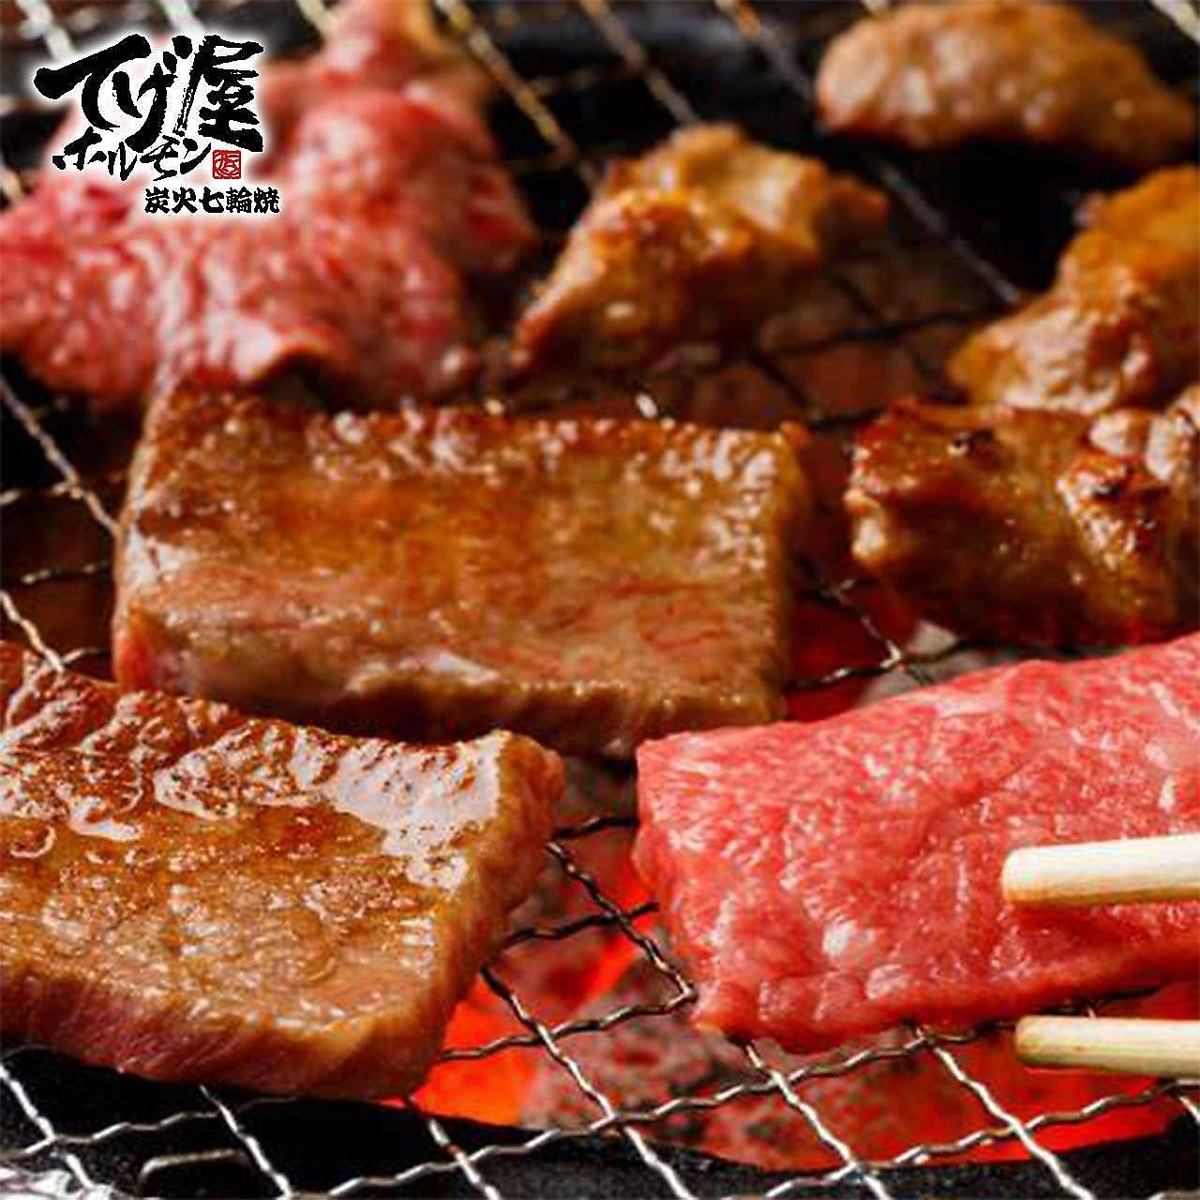 [Tegeya Hormone] All-you-can-eat and all-you-can-drink course including salted tongue and Japanese black beef is very popular!